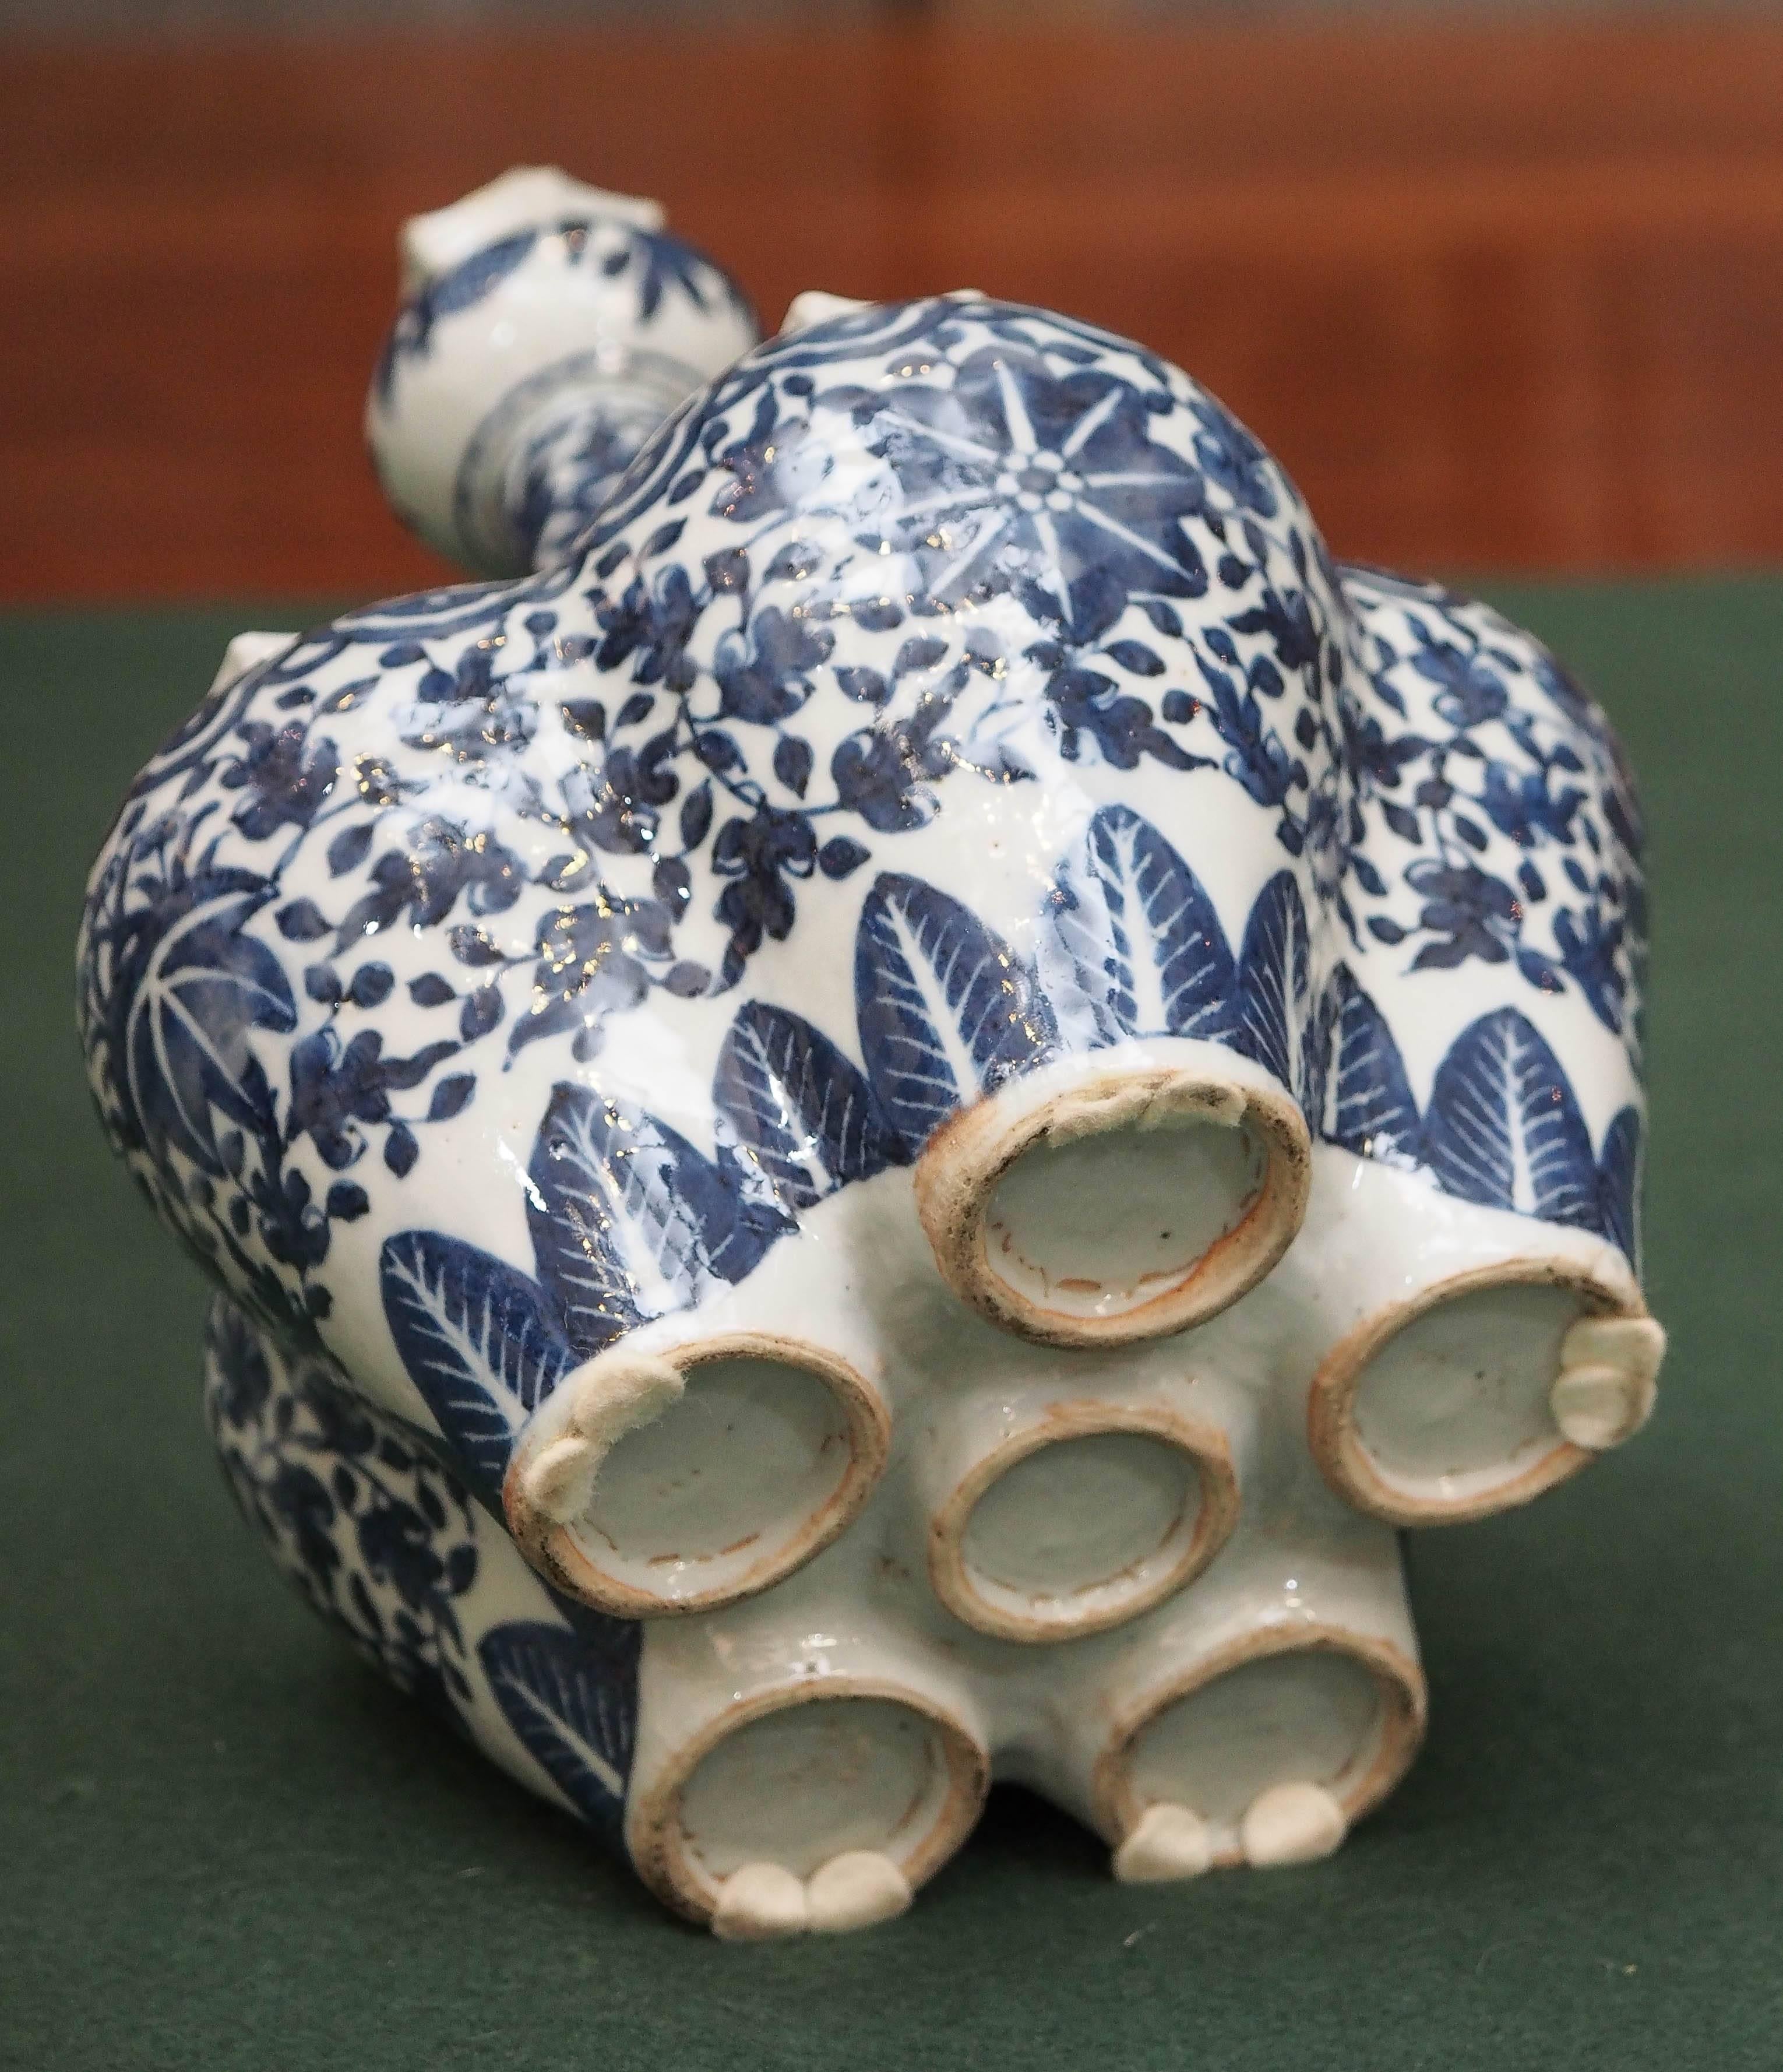 19th Century Chinese Blue and White Tulipiere with Floral Motif